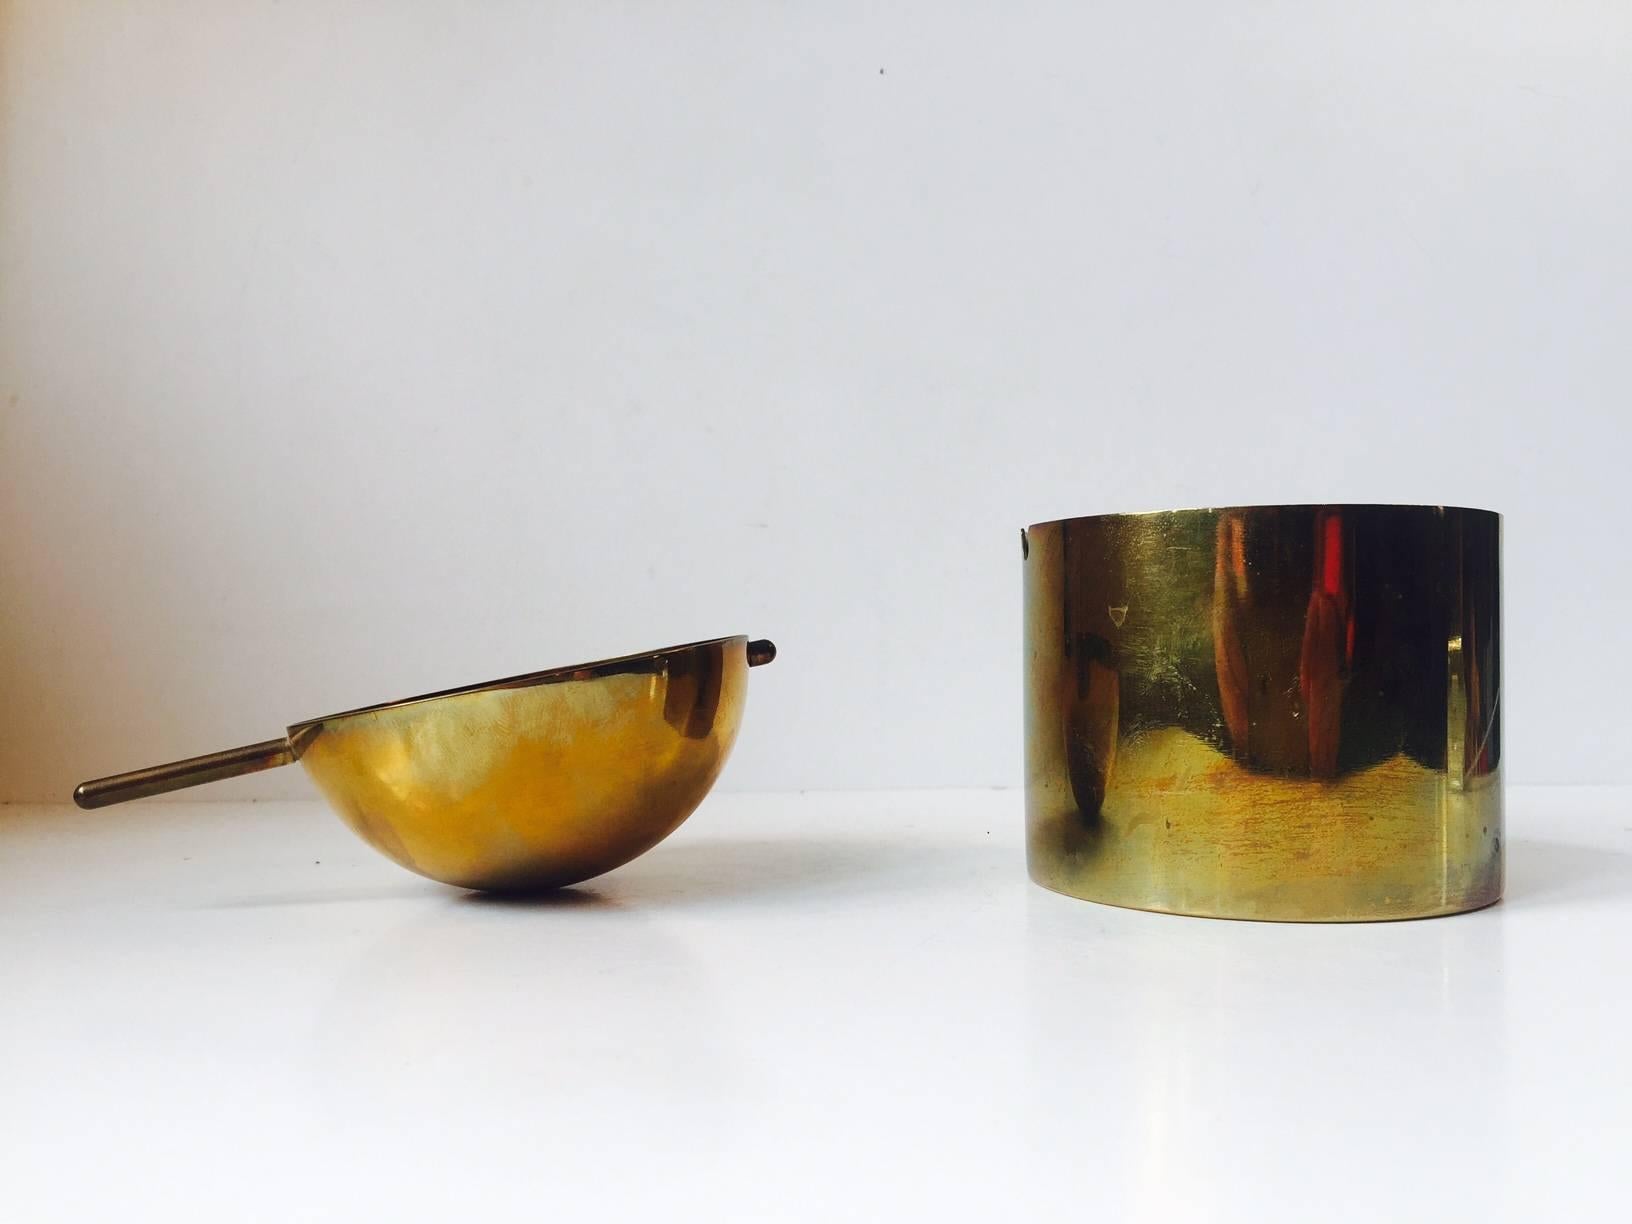 This brass version of the Cylinda-line ashtray was designed by Arne Jacobsen and manufactured by Stelton in a limited run in 1967. This, the large version or cigar ashtray, is by far the rarest of the two sizes it came in. The nice thing about it is